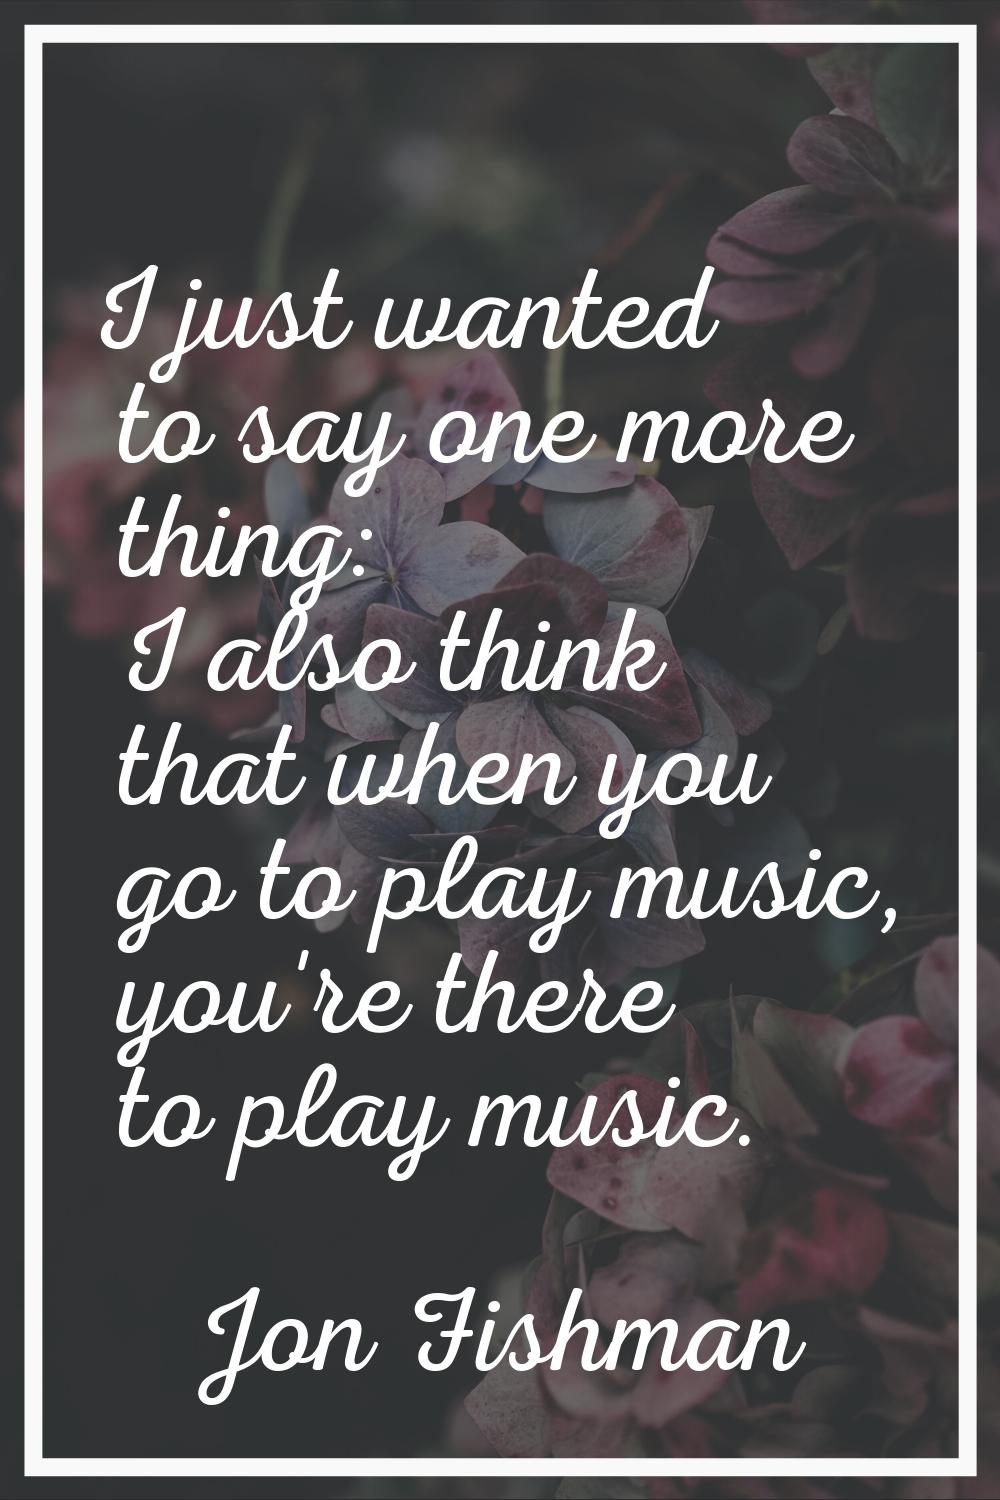 I just wanted to say one more thing: I also think that when you go to play music, you're there to p